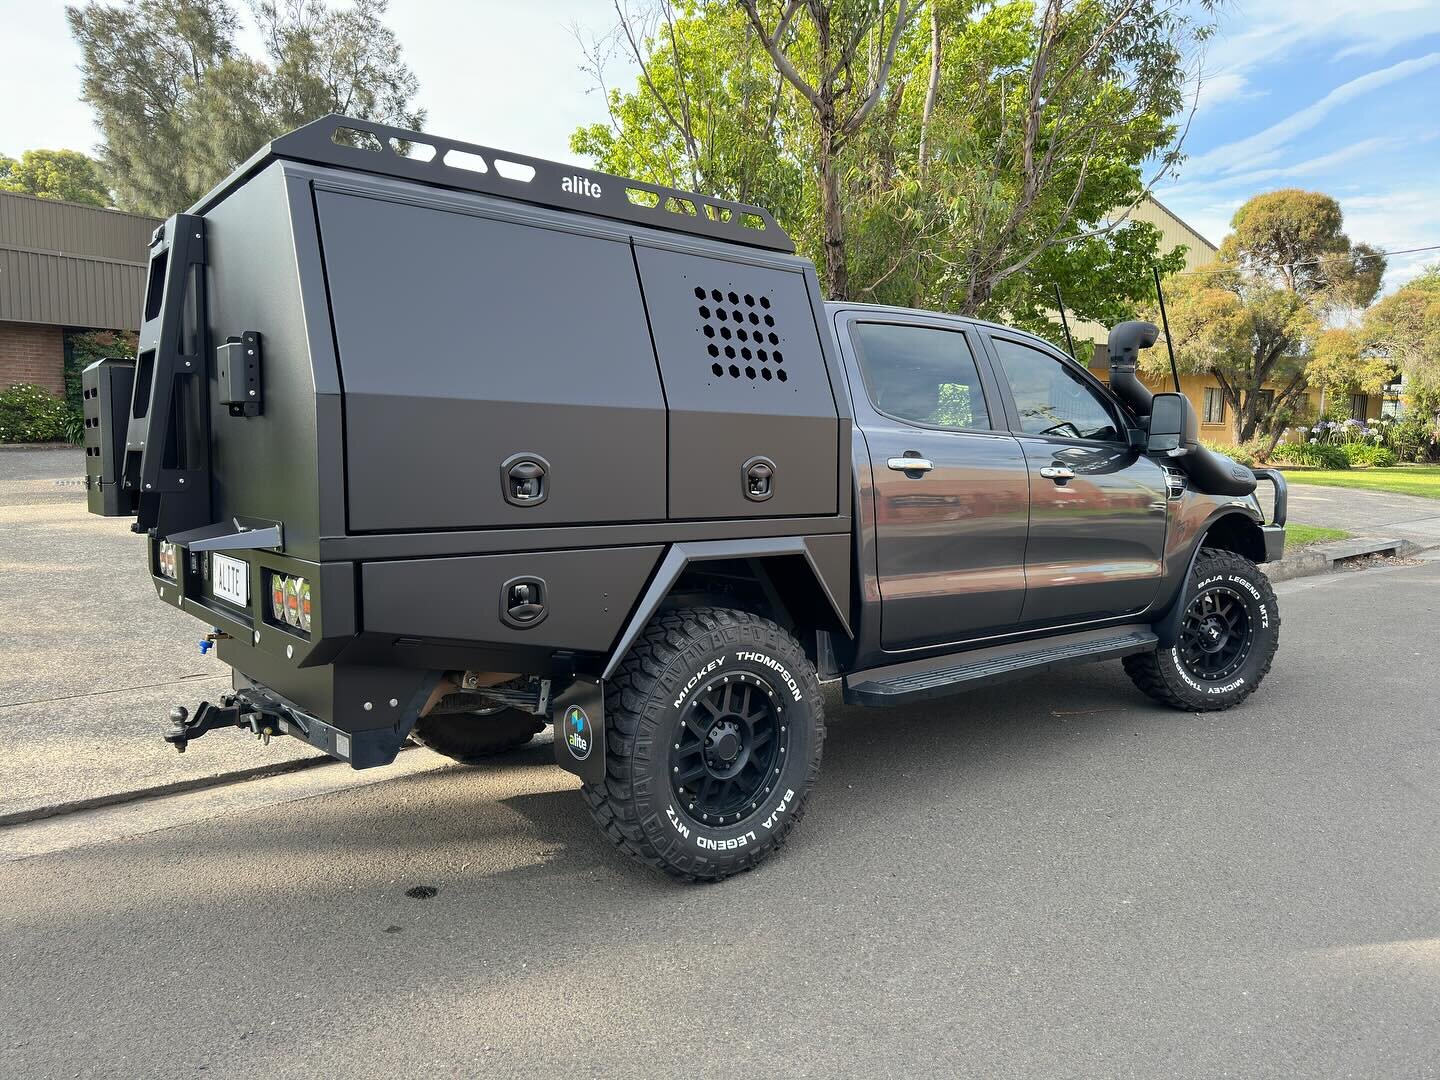 Px3 Ford Ranger canopy complete. 

FEATURING 
-Full time canopy body
-Built in Dog Box 
-Under tray toolboxes 
-Flared mudguards
-Flush mount fuel filler 
-Lockable Jerry can holder
-Fold down rear ladder
-Spare wheel holder
-Alite platform roof rack